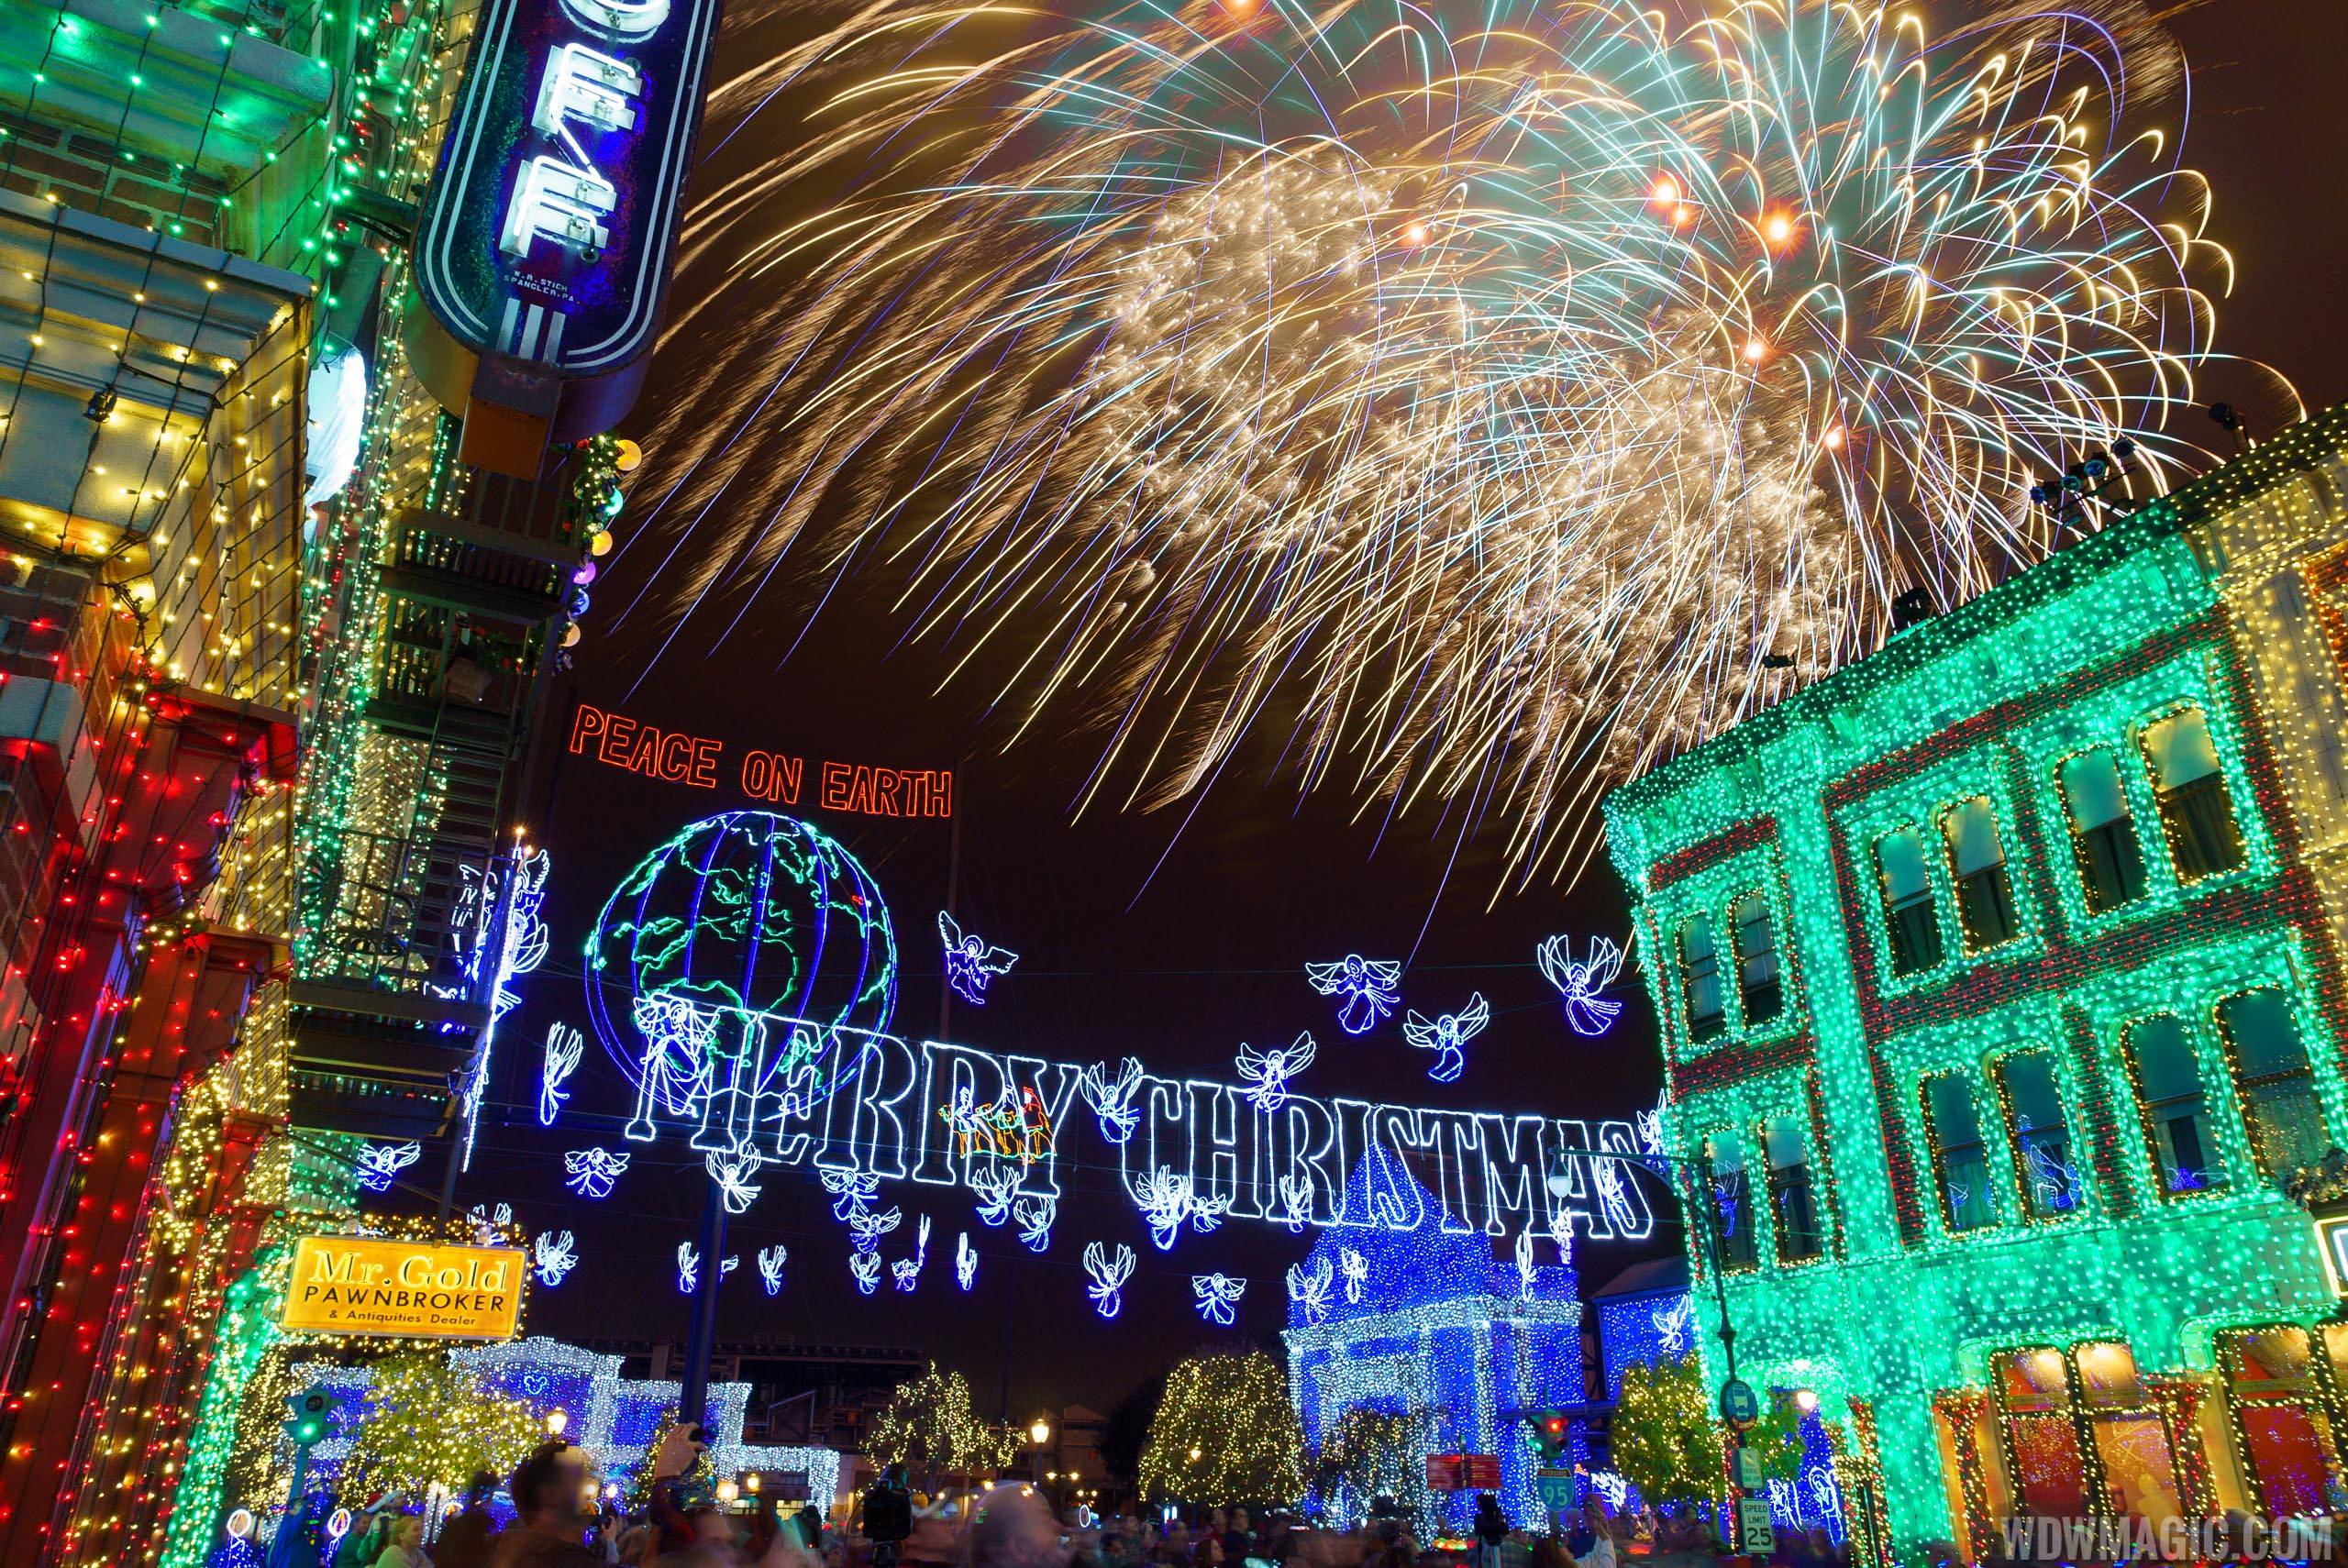 Fireworks over the final night of the Osborne Lights